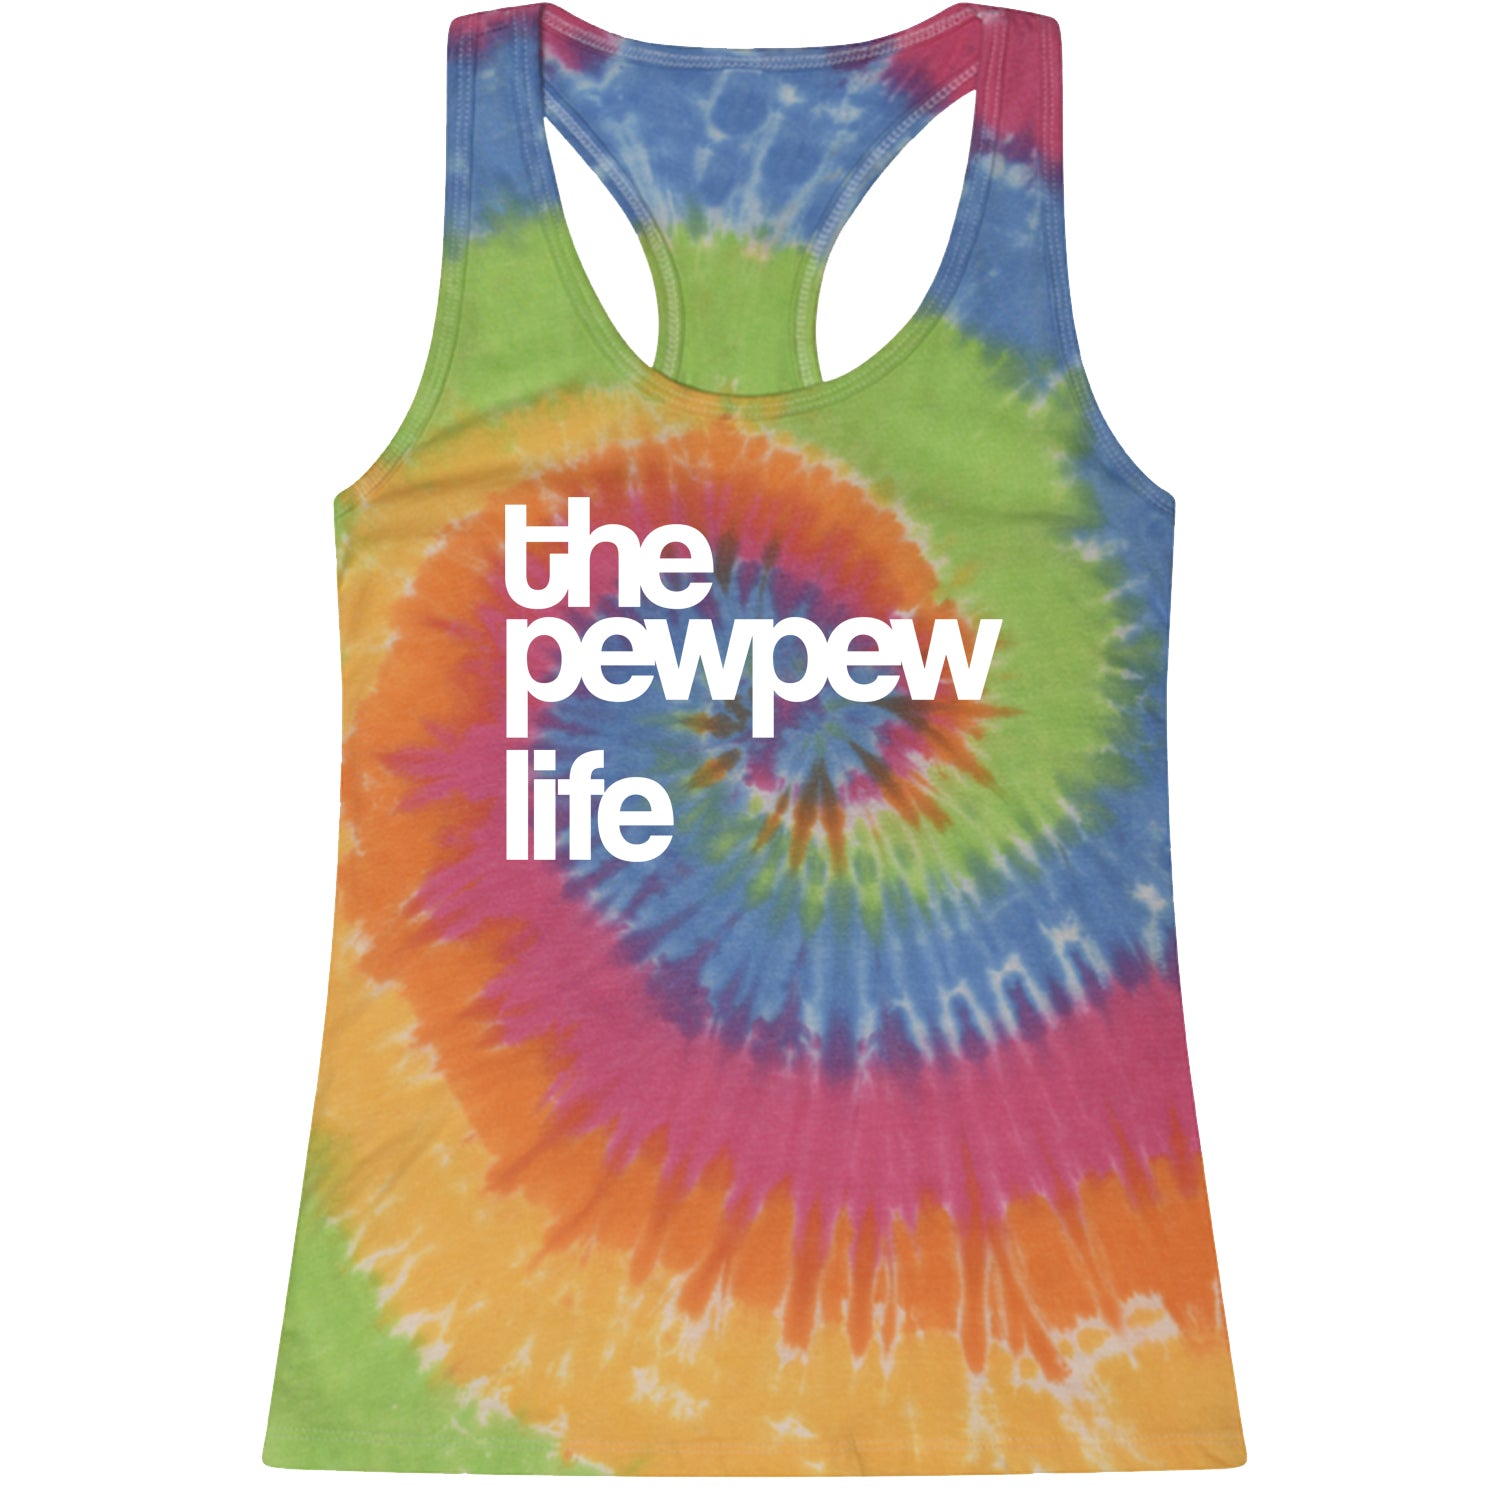 The PewPew Pew Pew Life Gun Rights Racerback Tank Top for Women #expressiontees by Expression Tees